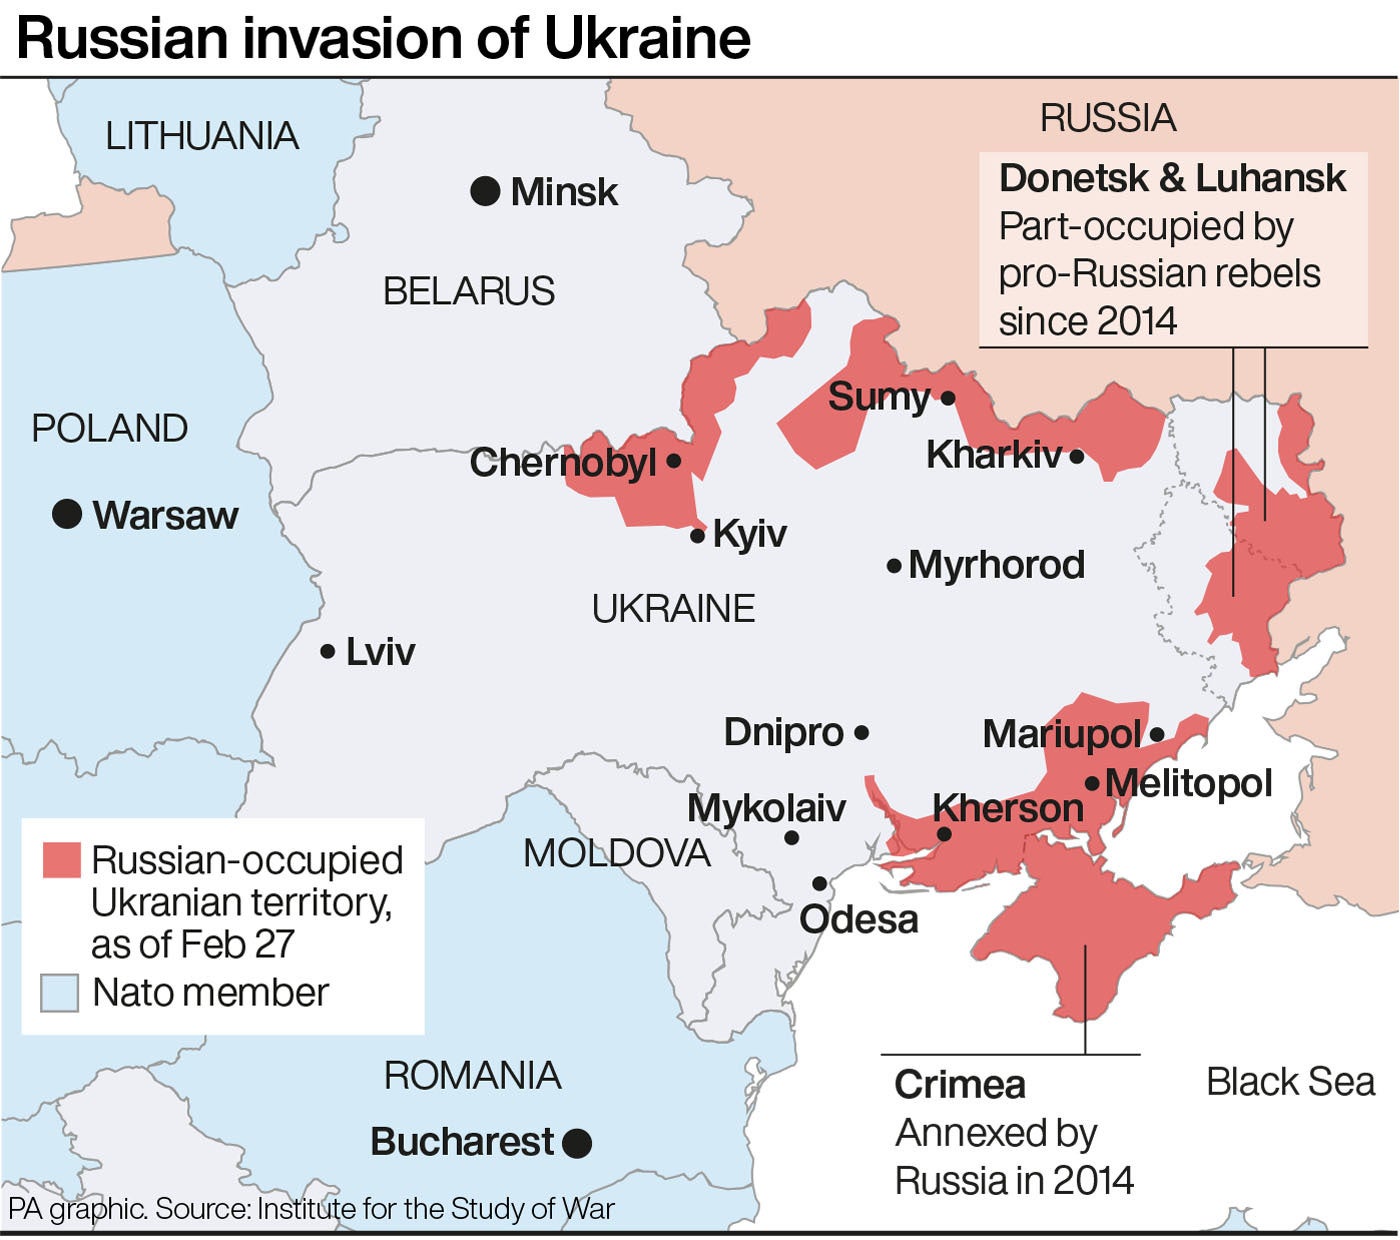 The map shows the extent of Russia’s invasion of Ukraine